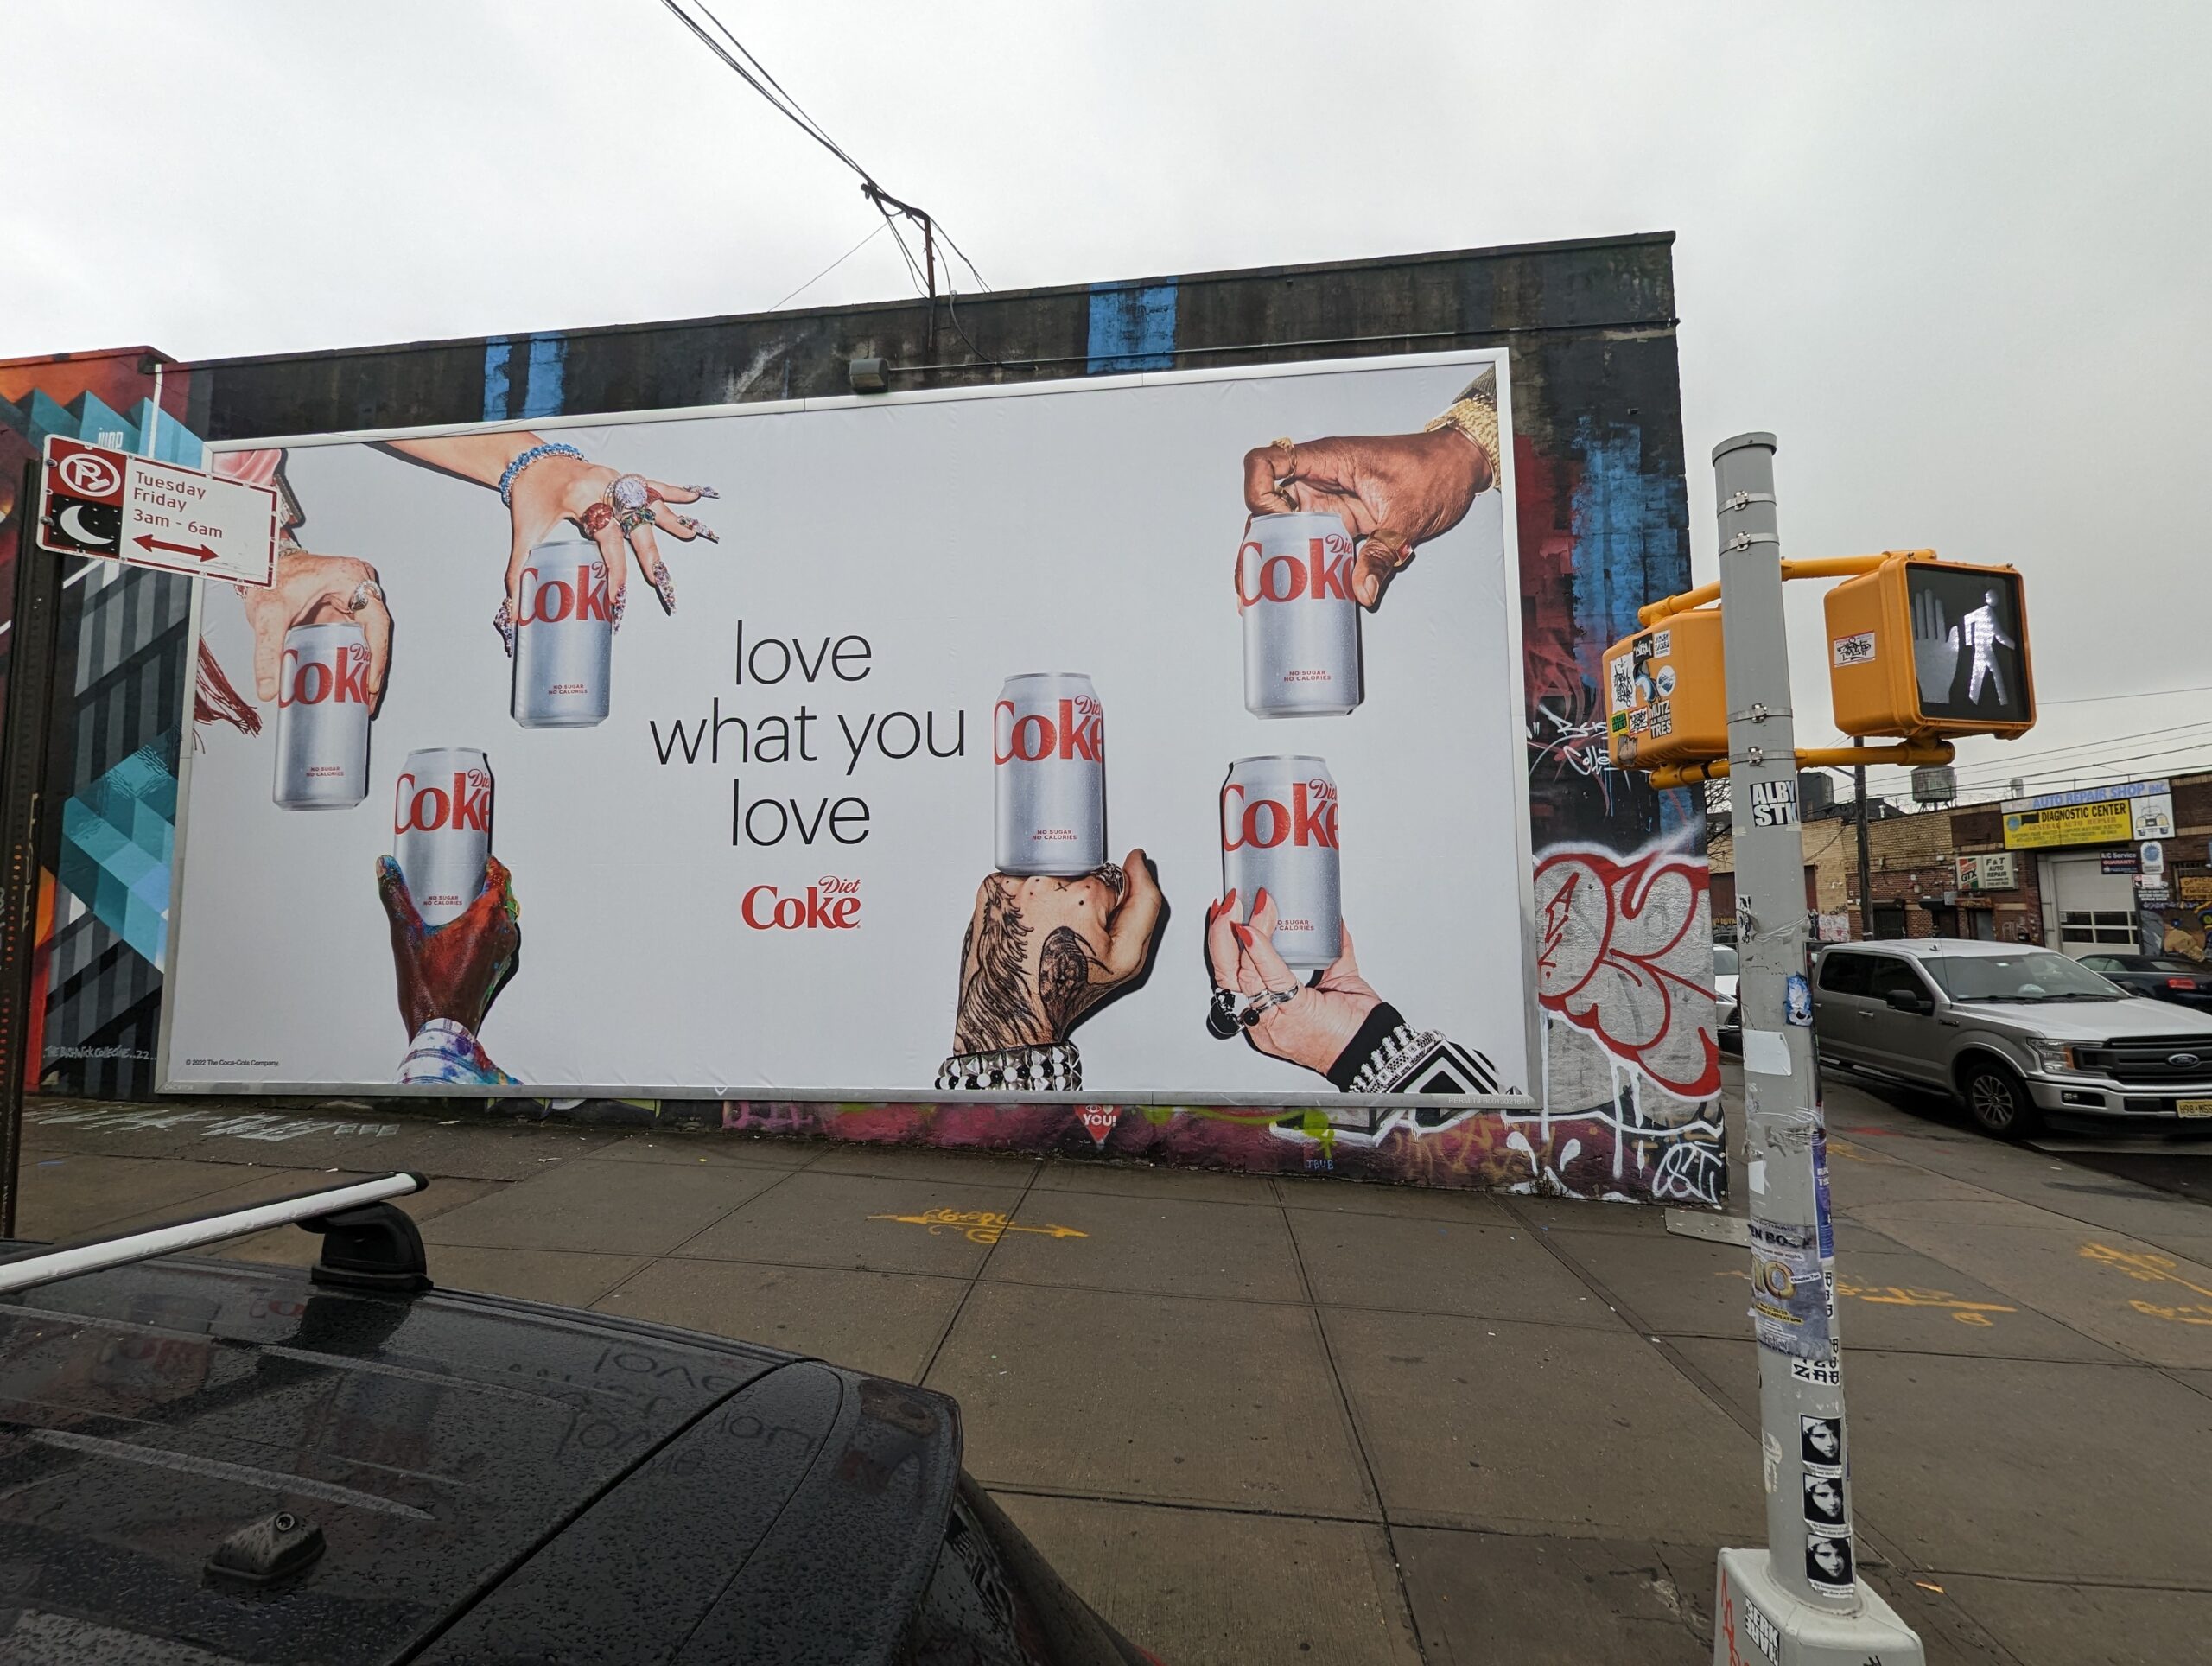 Diet Coke Coca-Cola Outdoor Advertising Long-Term Permits NYC Dedicated Wild Posting Panel Bushwick Brooklyn Flushing Ave